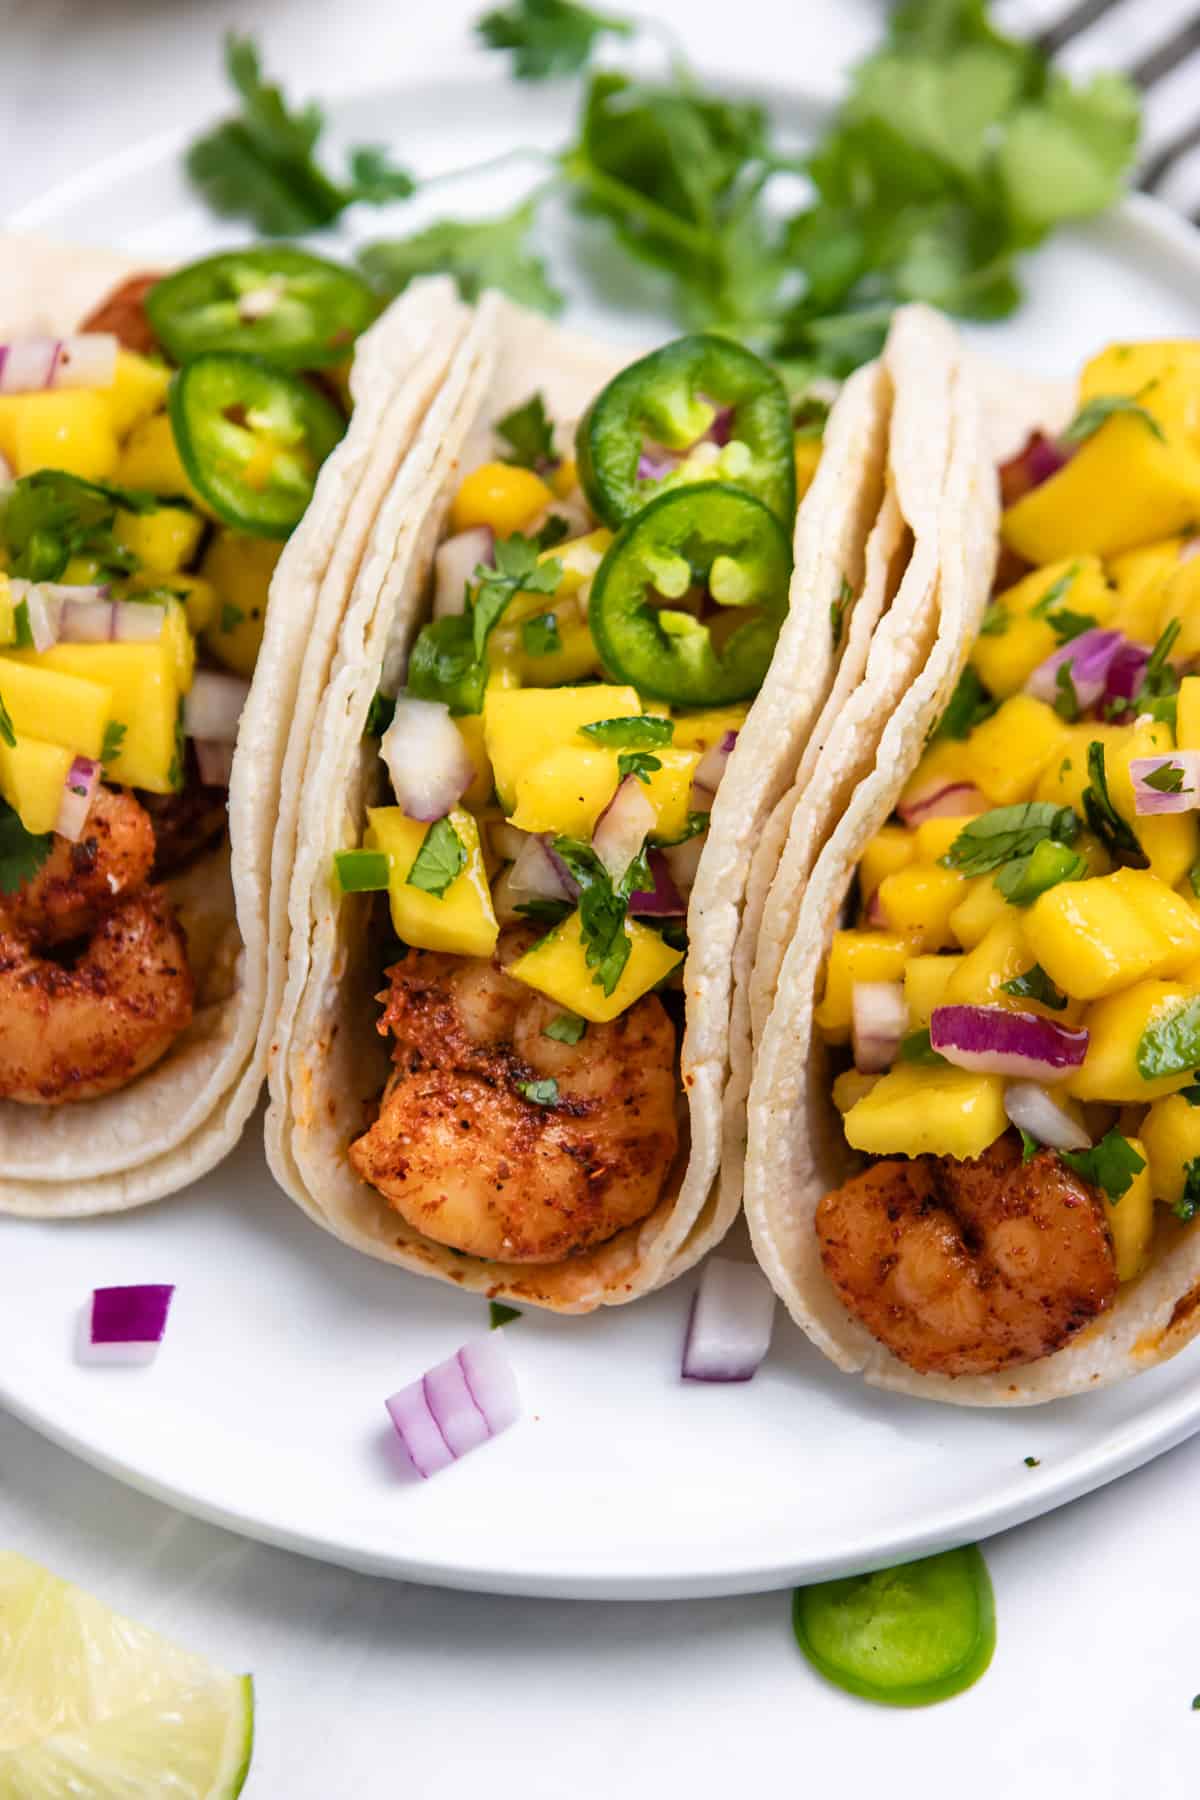 3 spicy shrimp tacos in corn tortillas covered with mango salsa on white plate.